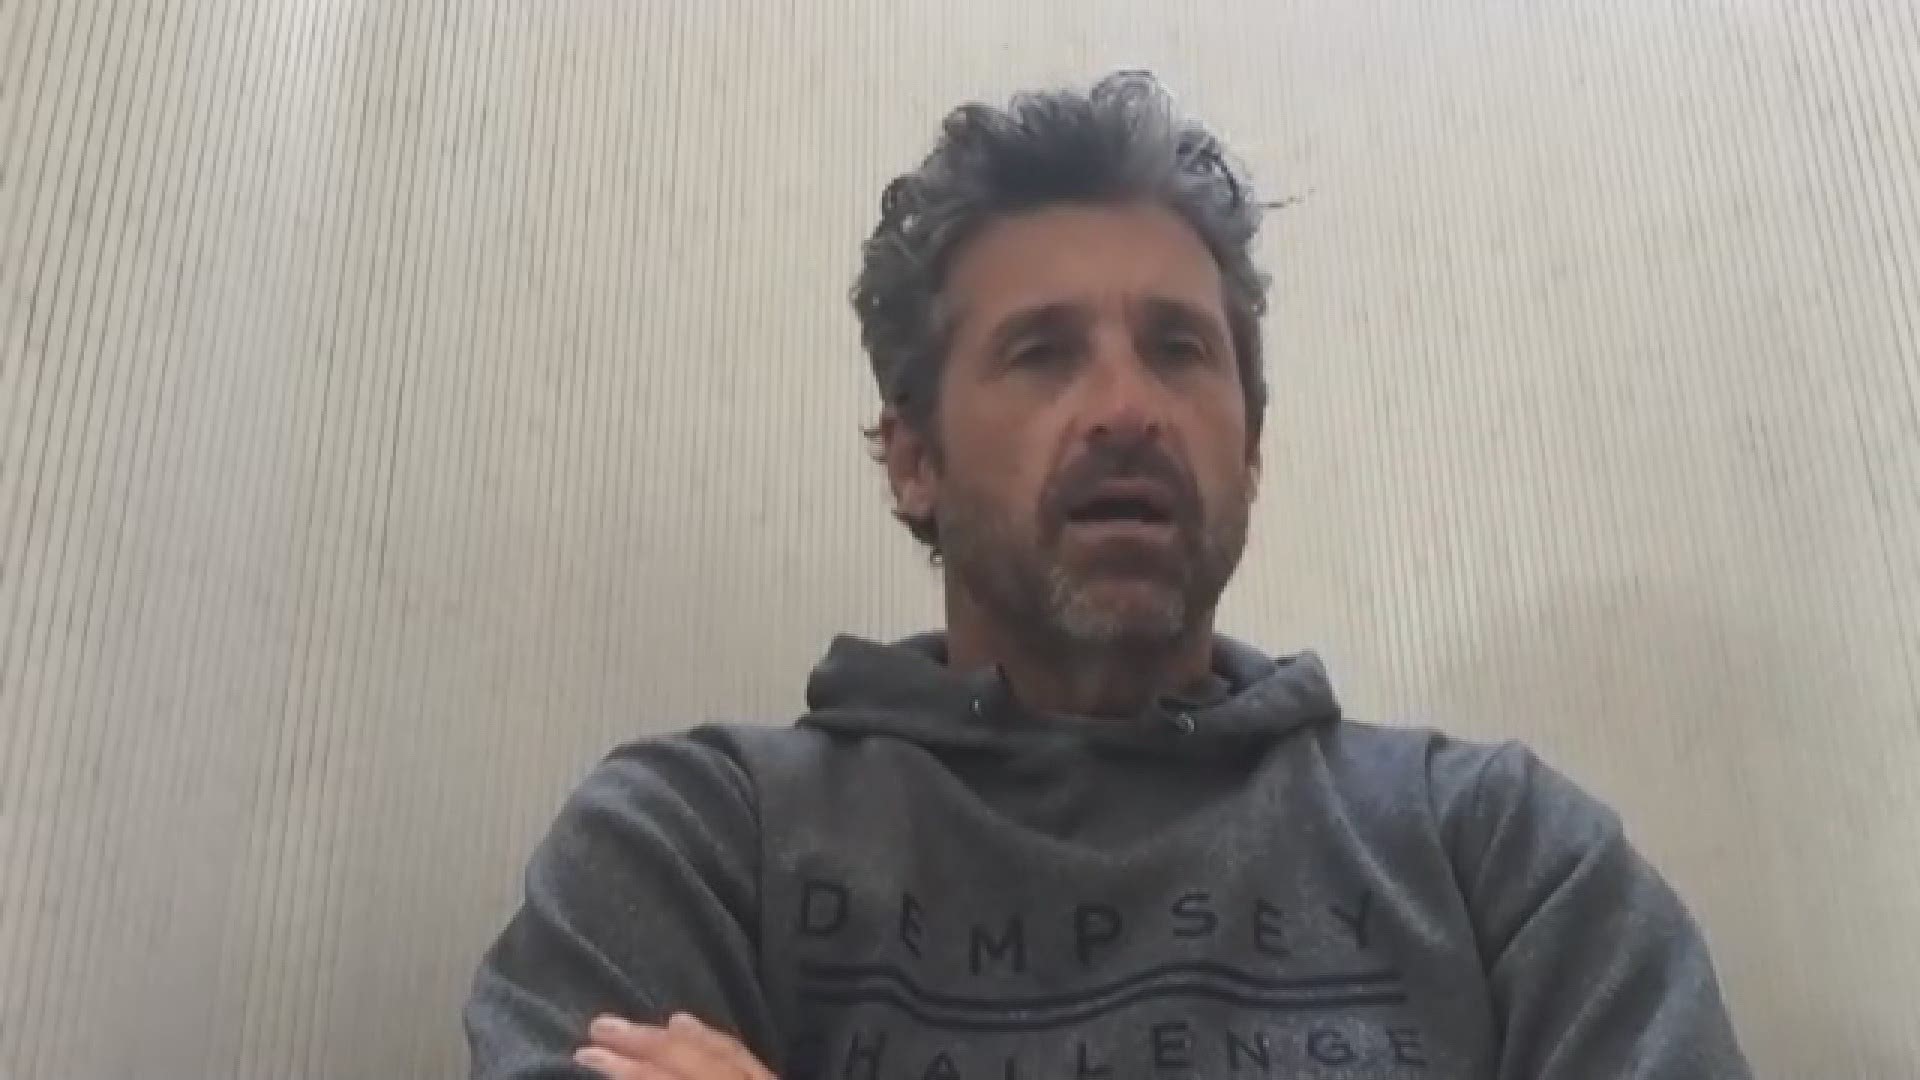 Patrick Dempsey has two new shows in the works